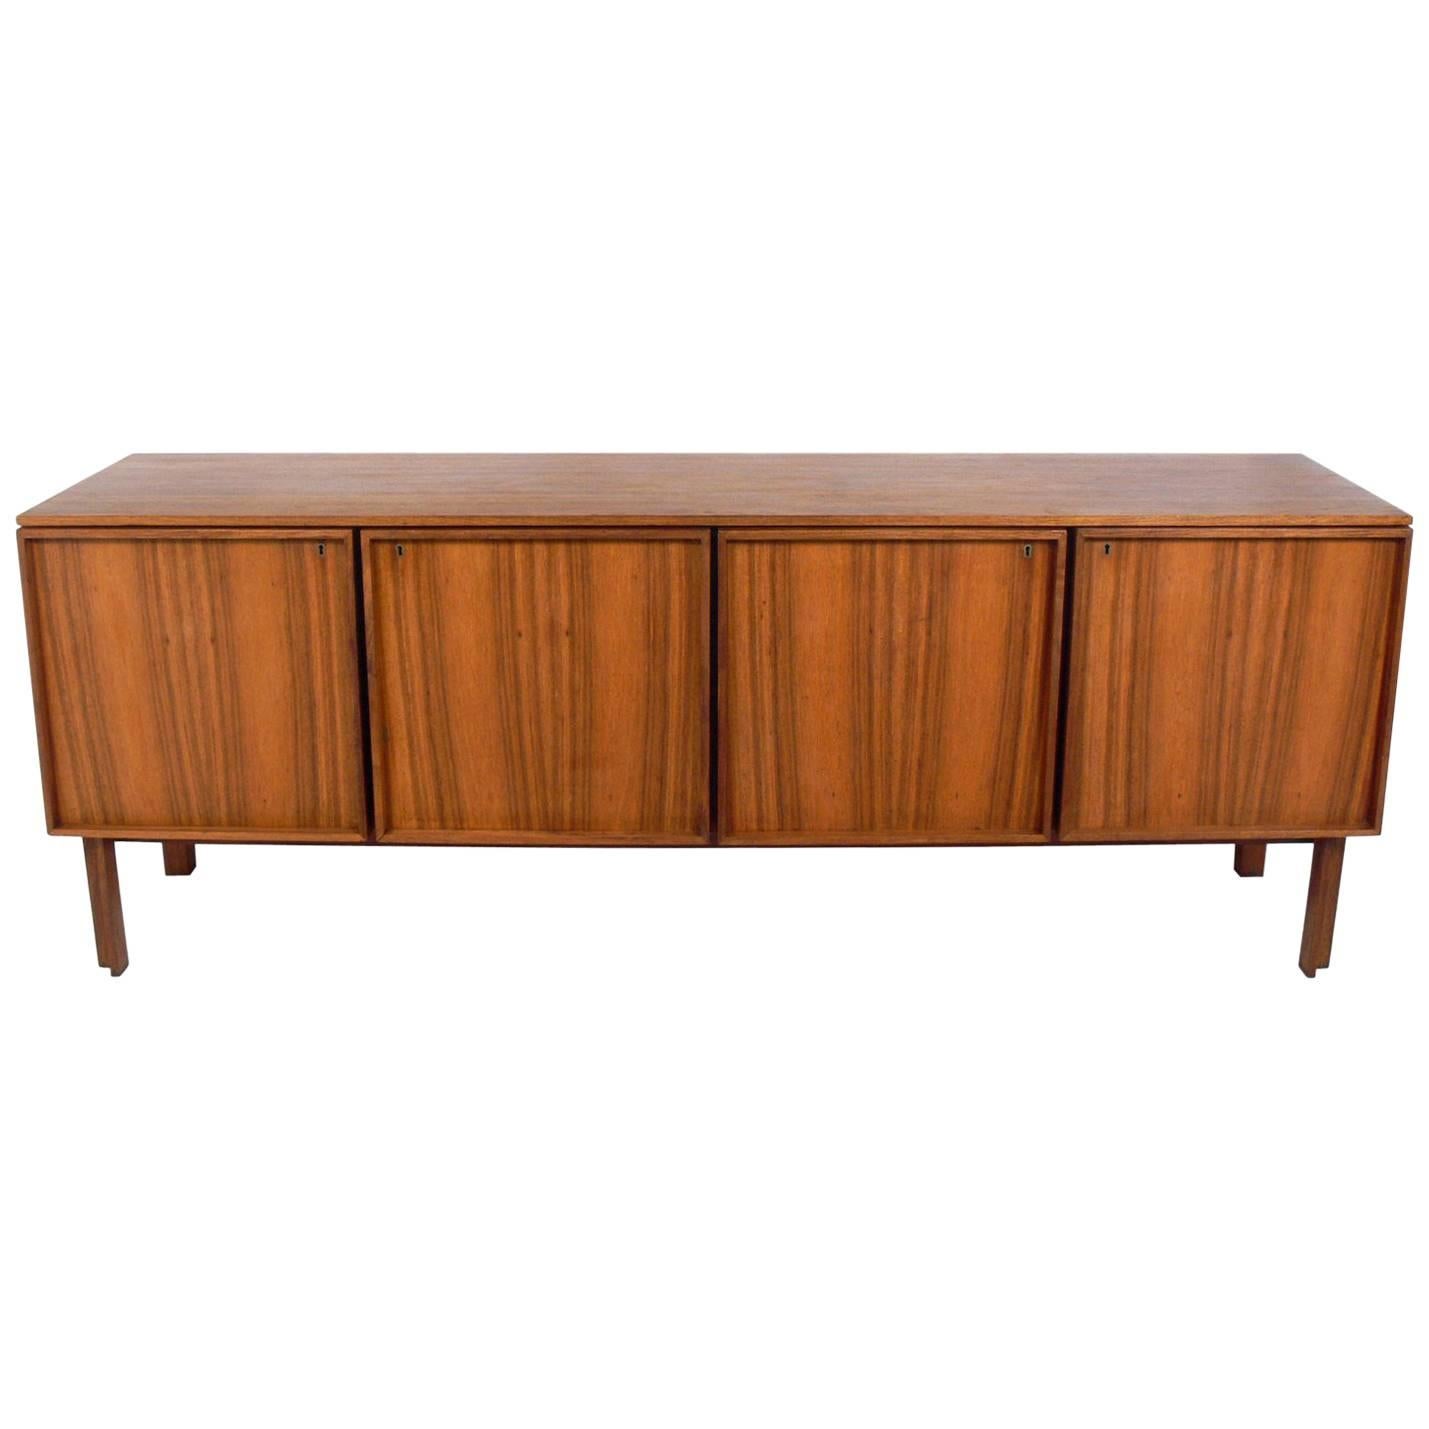 Clean Lined Midcentury Credenza by John Tabraham